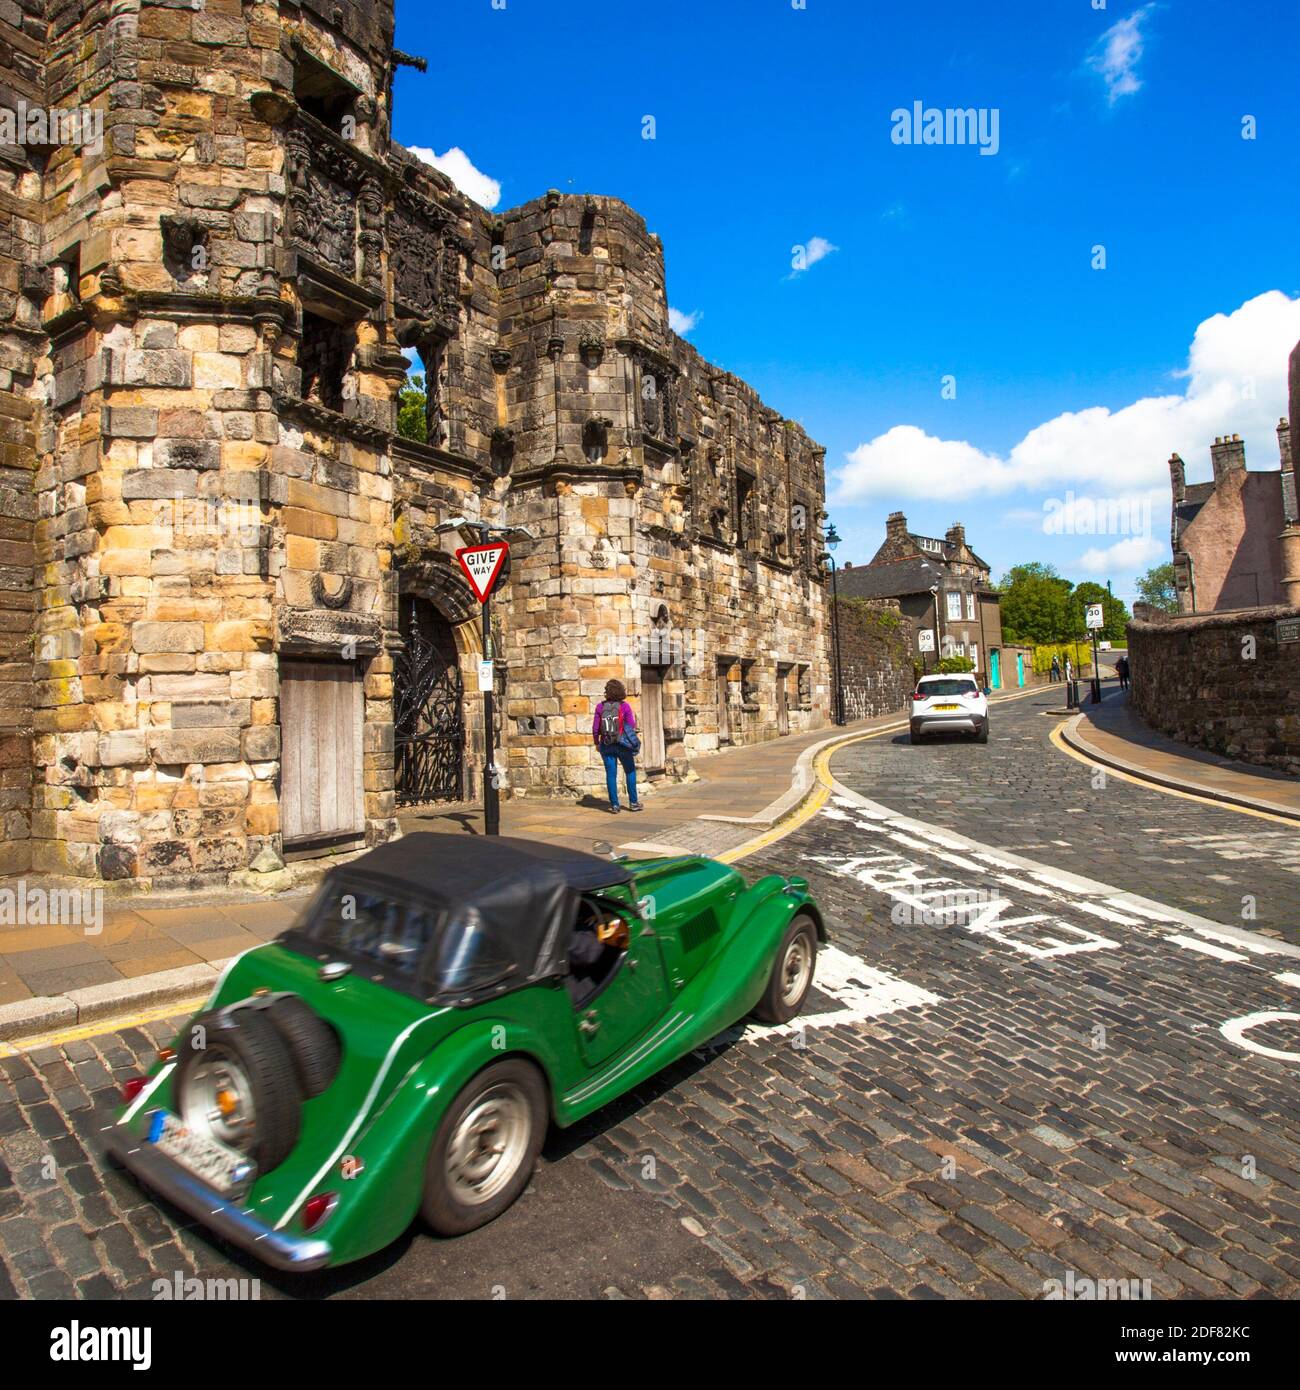 Classic old car, Façade of Mar´s Wark or Mar´s Lodging ruined, Historic Scotland, Stirling city, Scotland, United Kingdom, Europe. Stock Photo